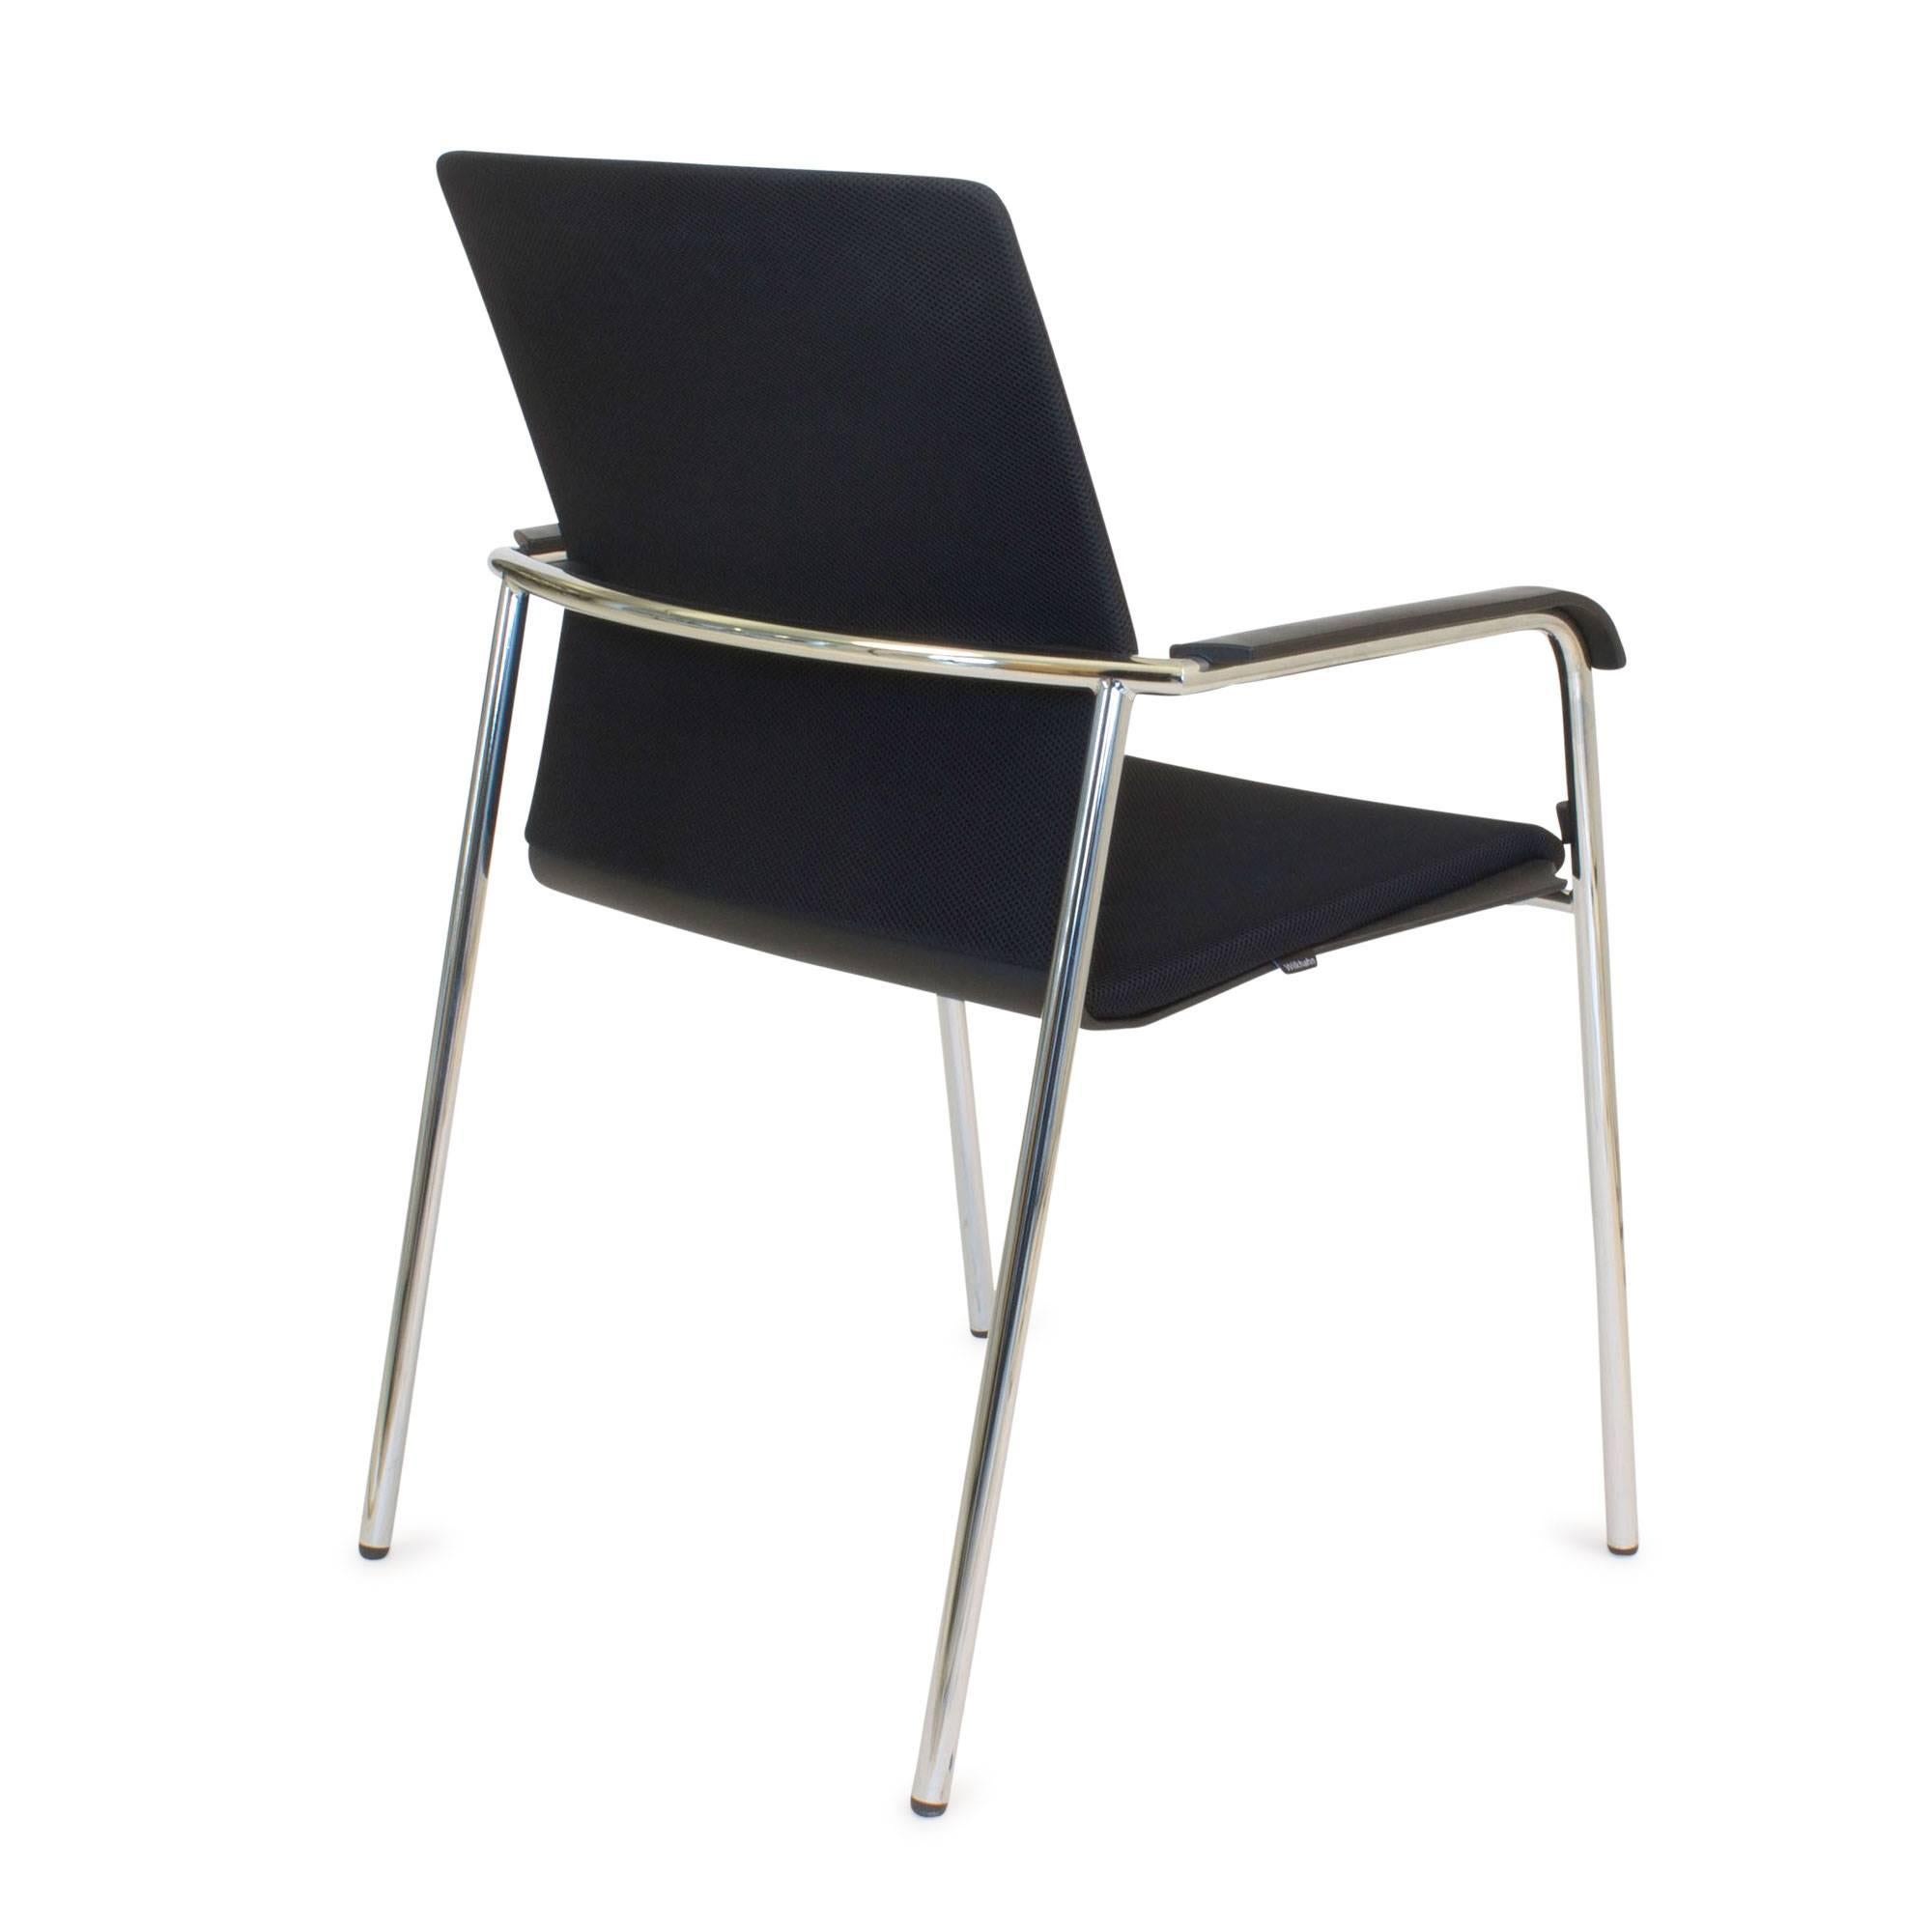 Chrome and Mesh Fabric on 176/7 Chair by Wiege for Wilkhahn, Germany In Good Condition For Sale In Brooklyn, NY